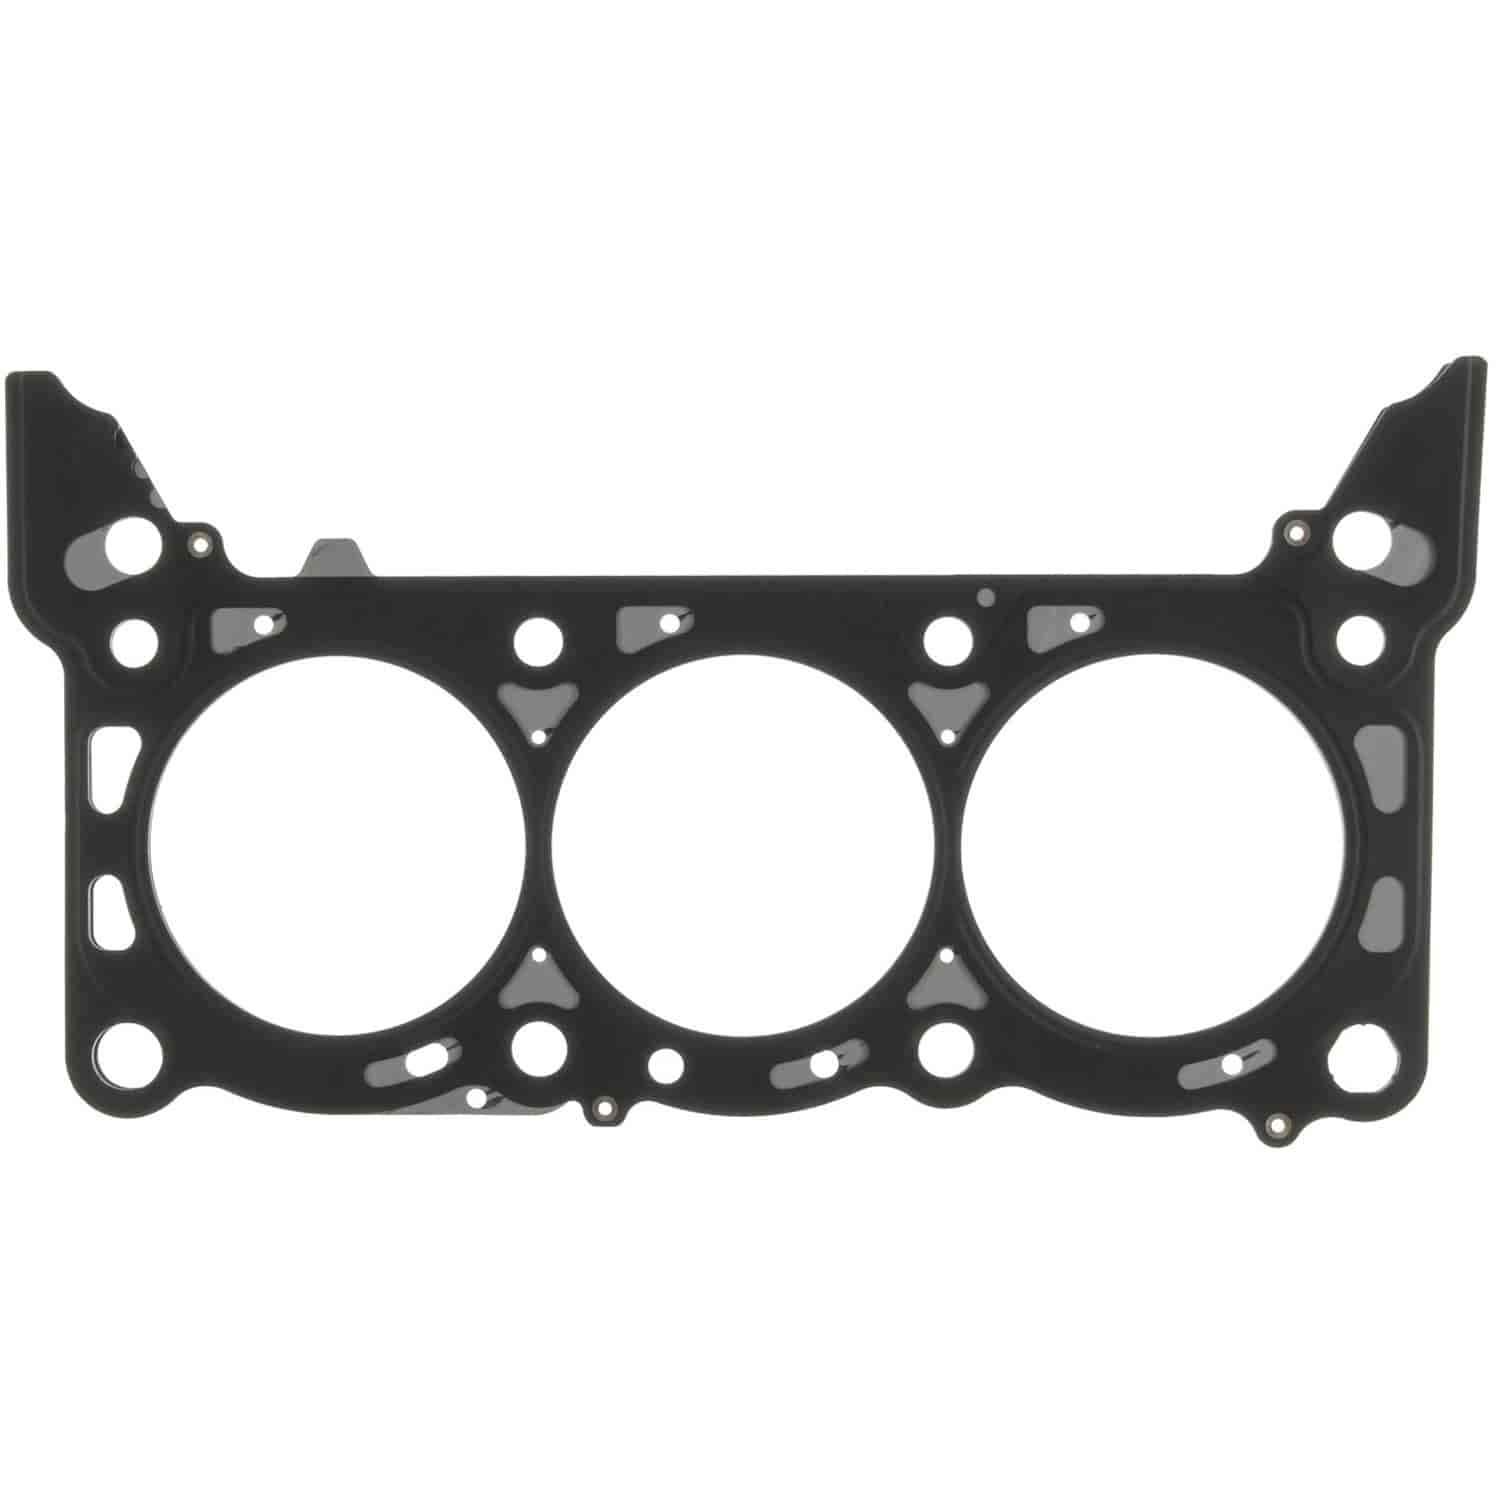 Cylinder Head Gasket Right Ford Products V6 3.8L 1997-98 Mustang 1997 T-Bird & Cougar RH .